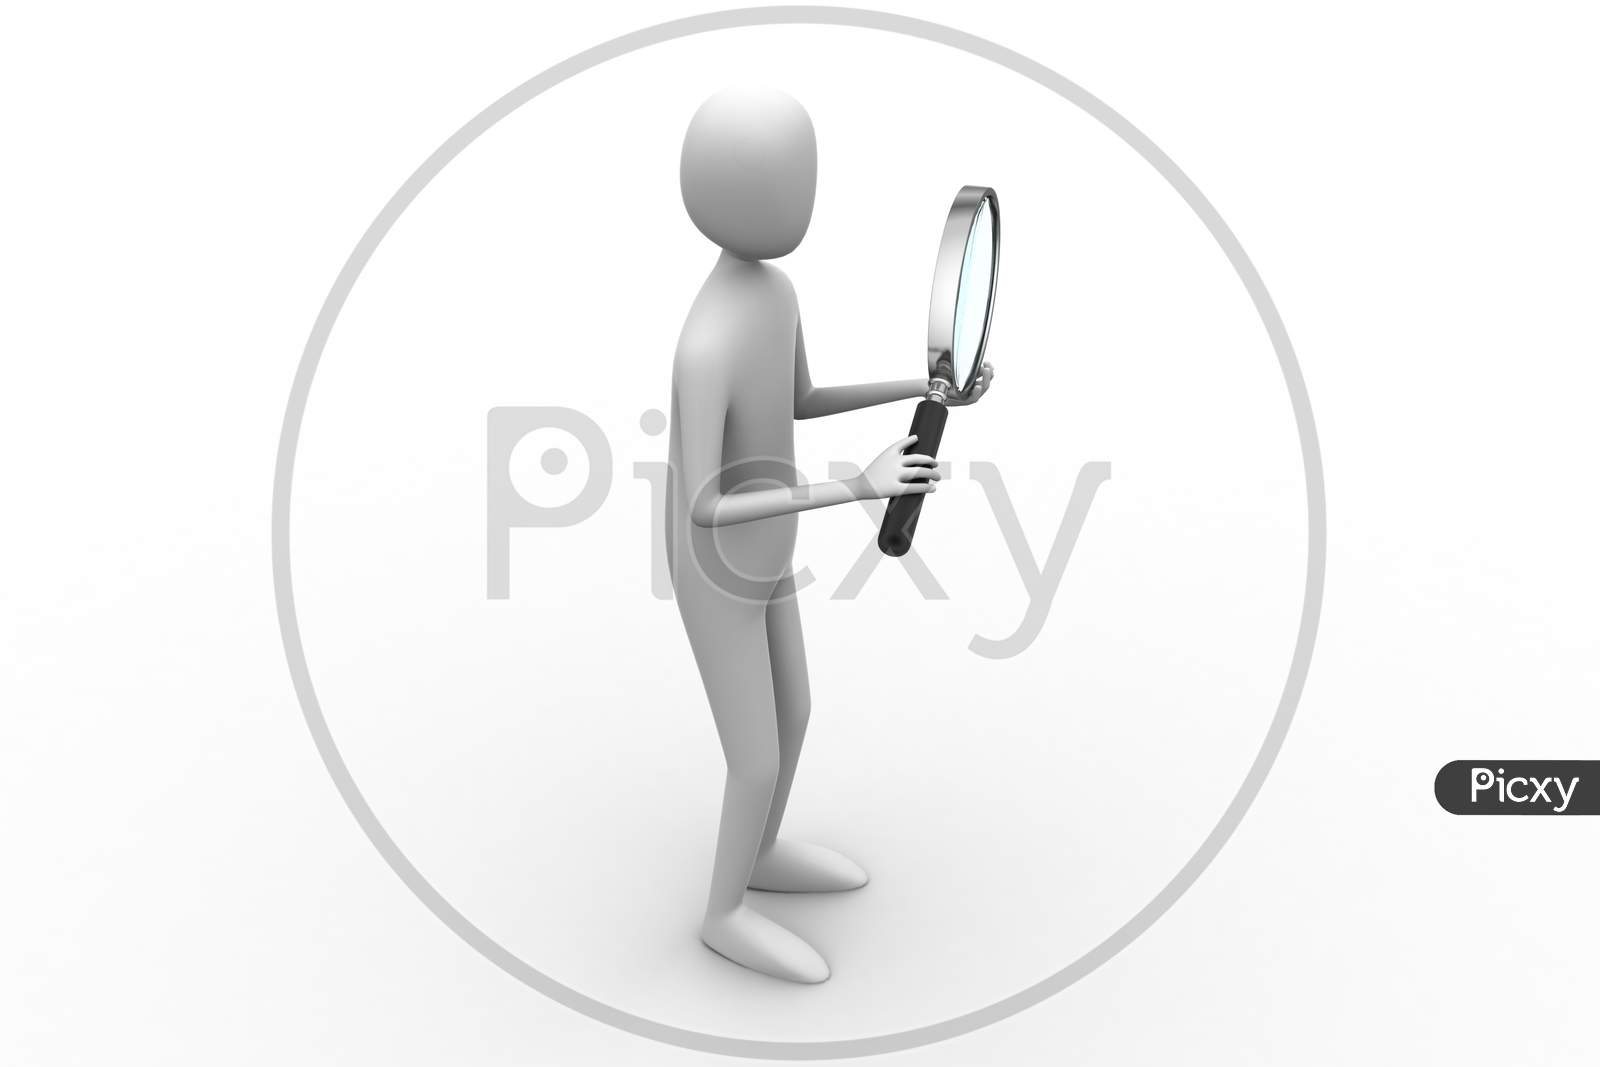 Man With Magnifier